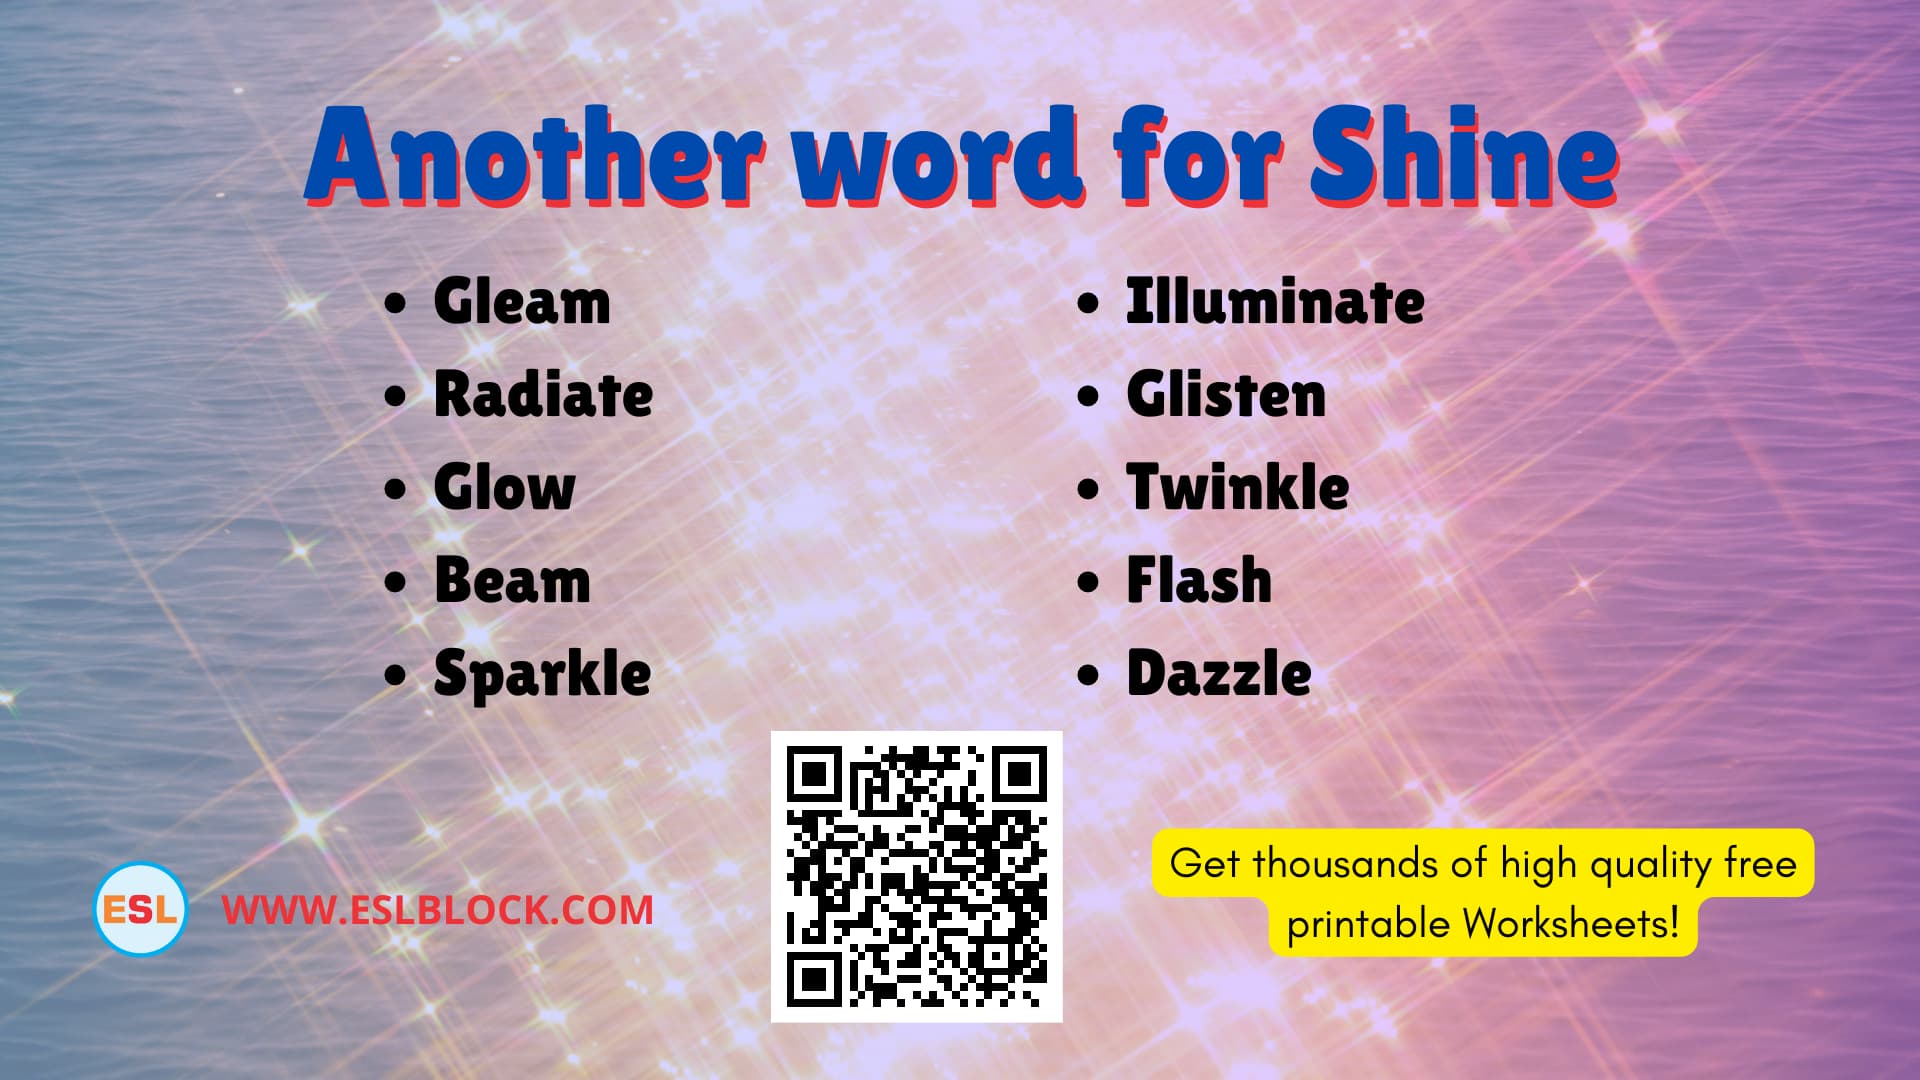 What is another word for Shine